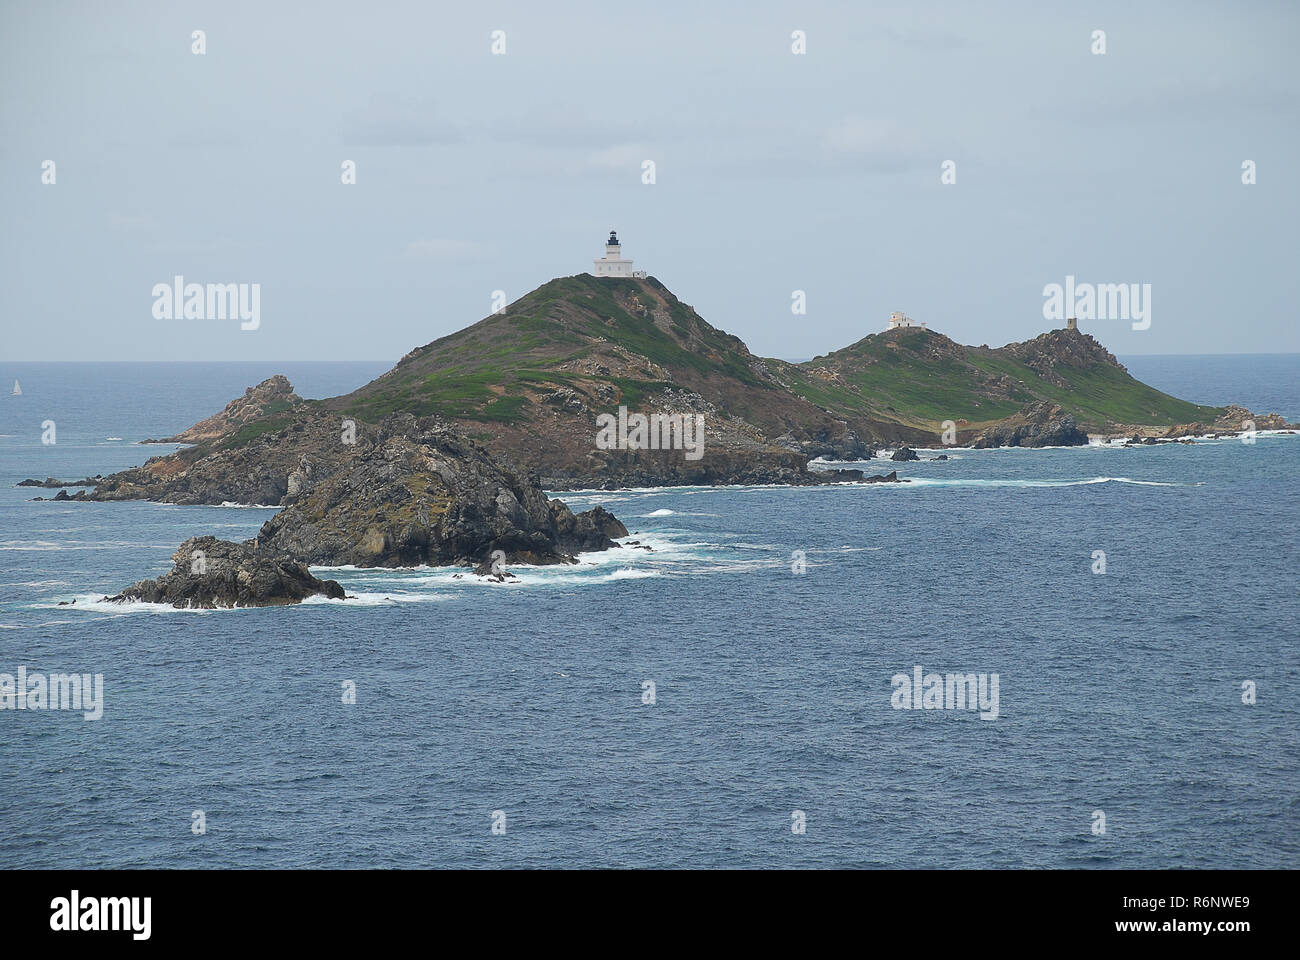 The Isles Sanguinaires (together forming the Archipelago of the Sanguinaires) Stock Photo